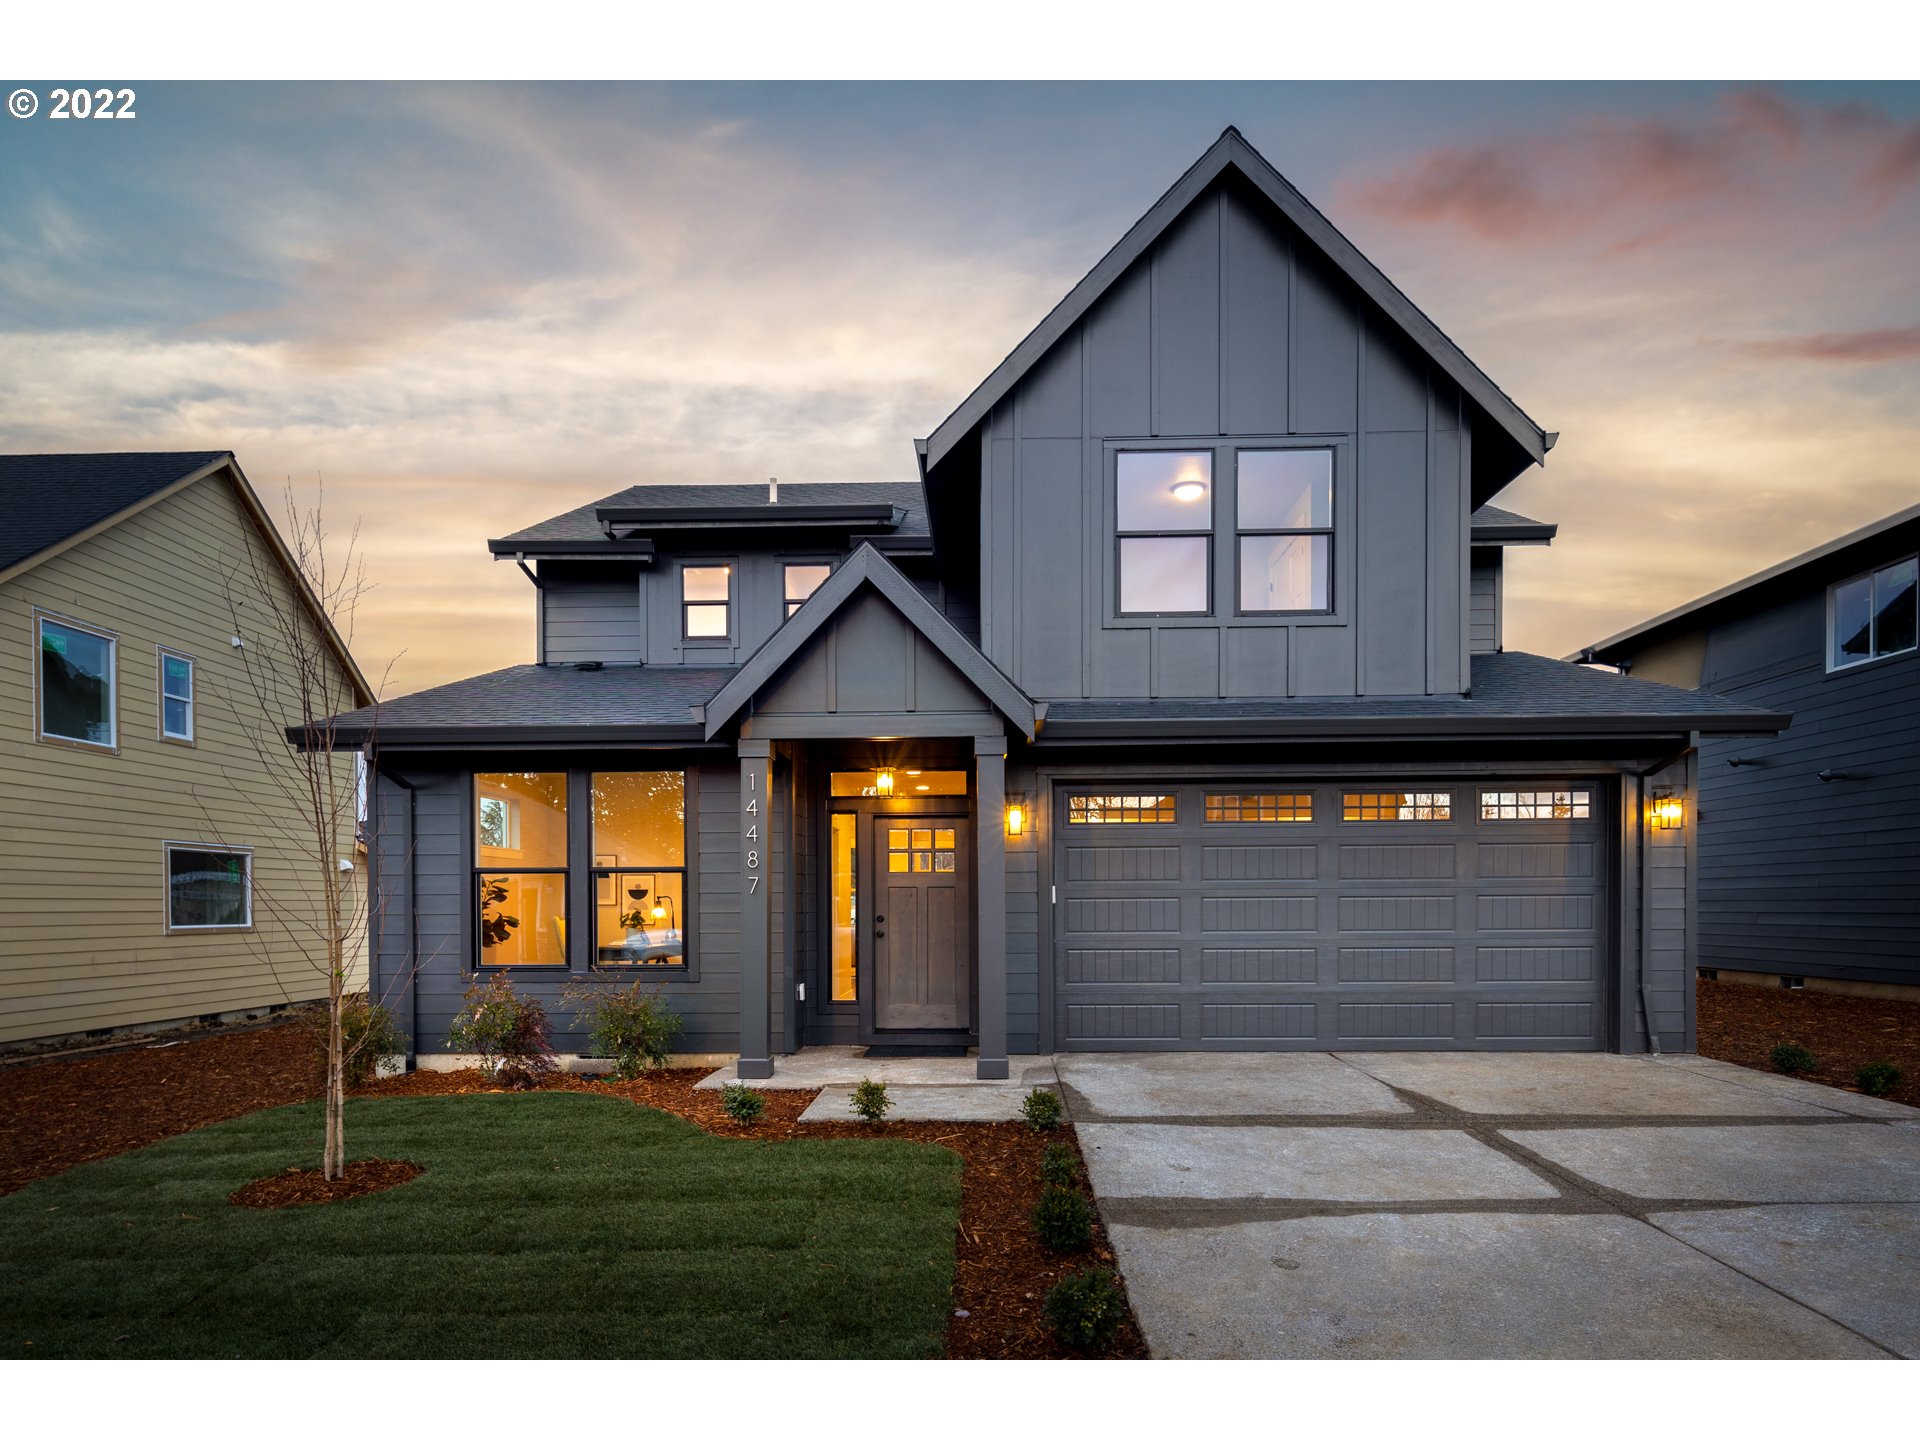 7 New Homes in Oregon City. Handcrafted by Stone Creek Building, an Earth Advantage builder. A blend of Modern and Traditional, lot 7 comes with central AC, On Demand hot water, wide plank flooring, a walk-in pantry, butler's counter, apron sink and a wine fridge. Many thoughtful upgrades include shaving bench in primary walk-in shower with double sinks and walk in closet. Main floor entry office. Covered back patio viewed through an 8'X 8' slider. 9' ceilings bring plenty of space and light!